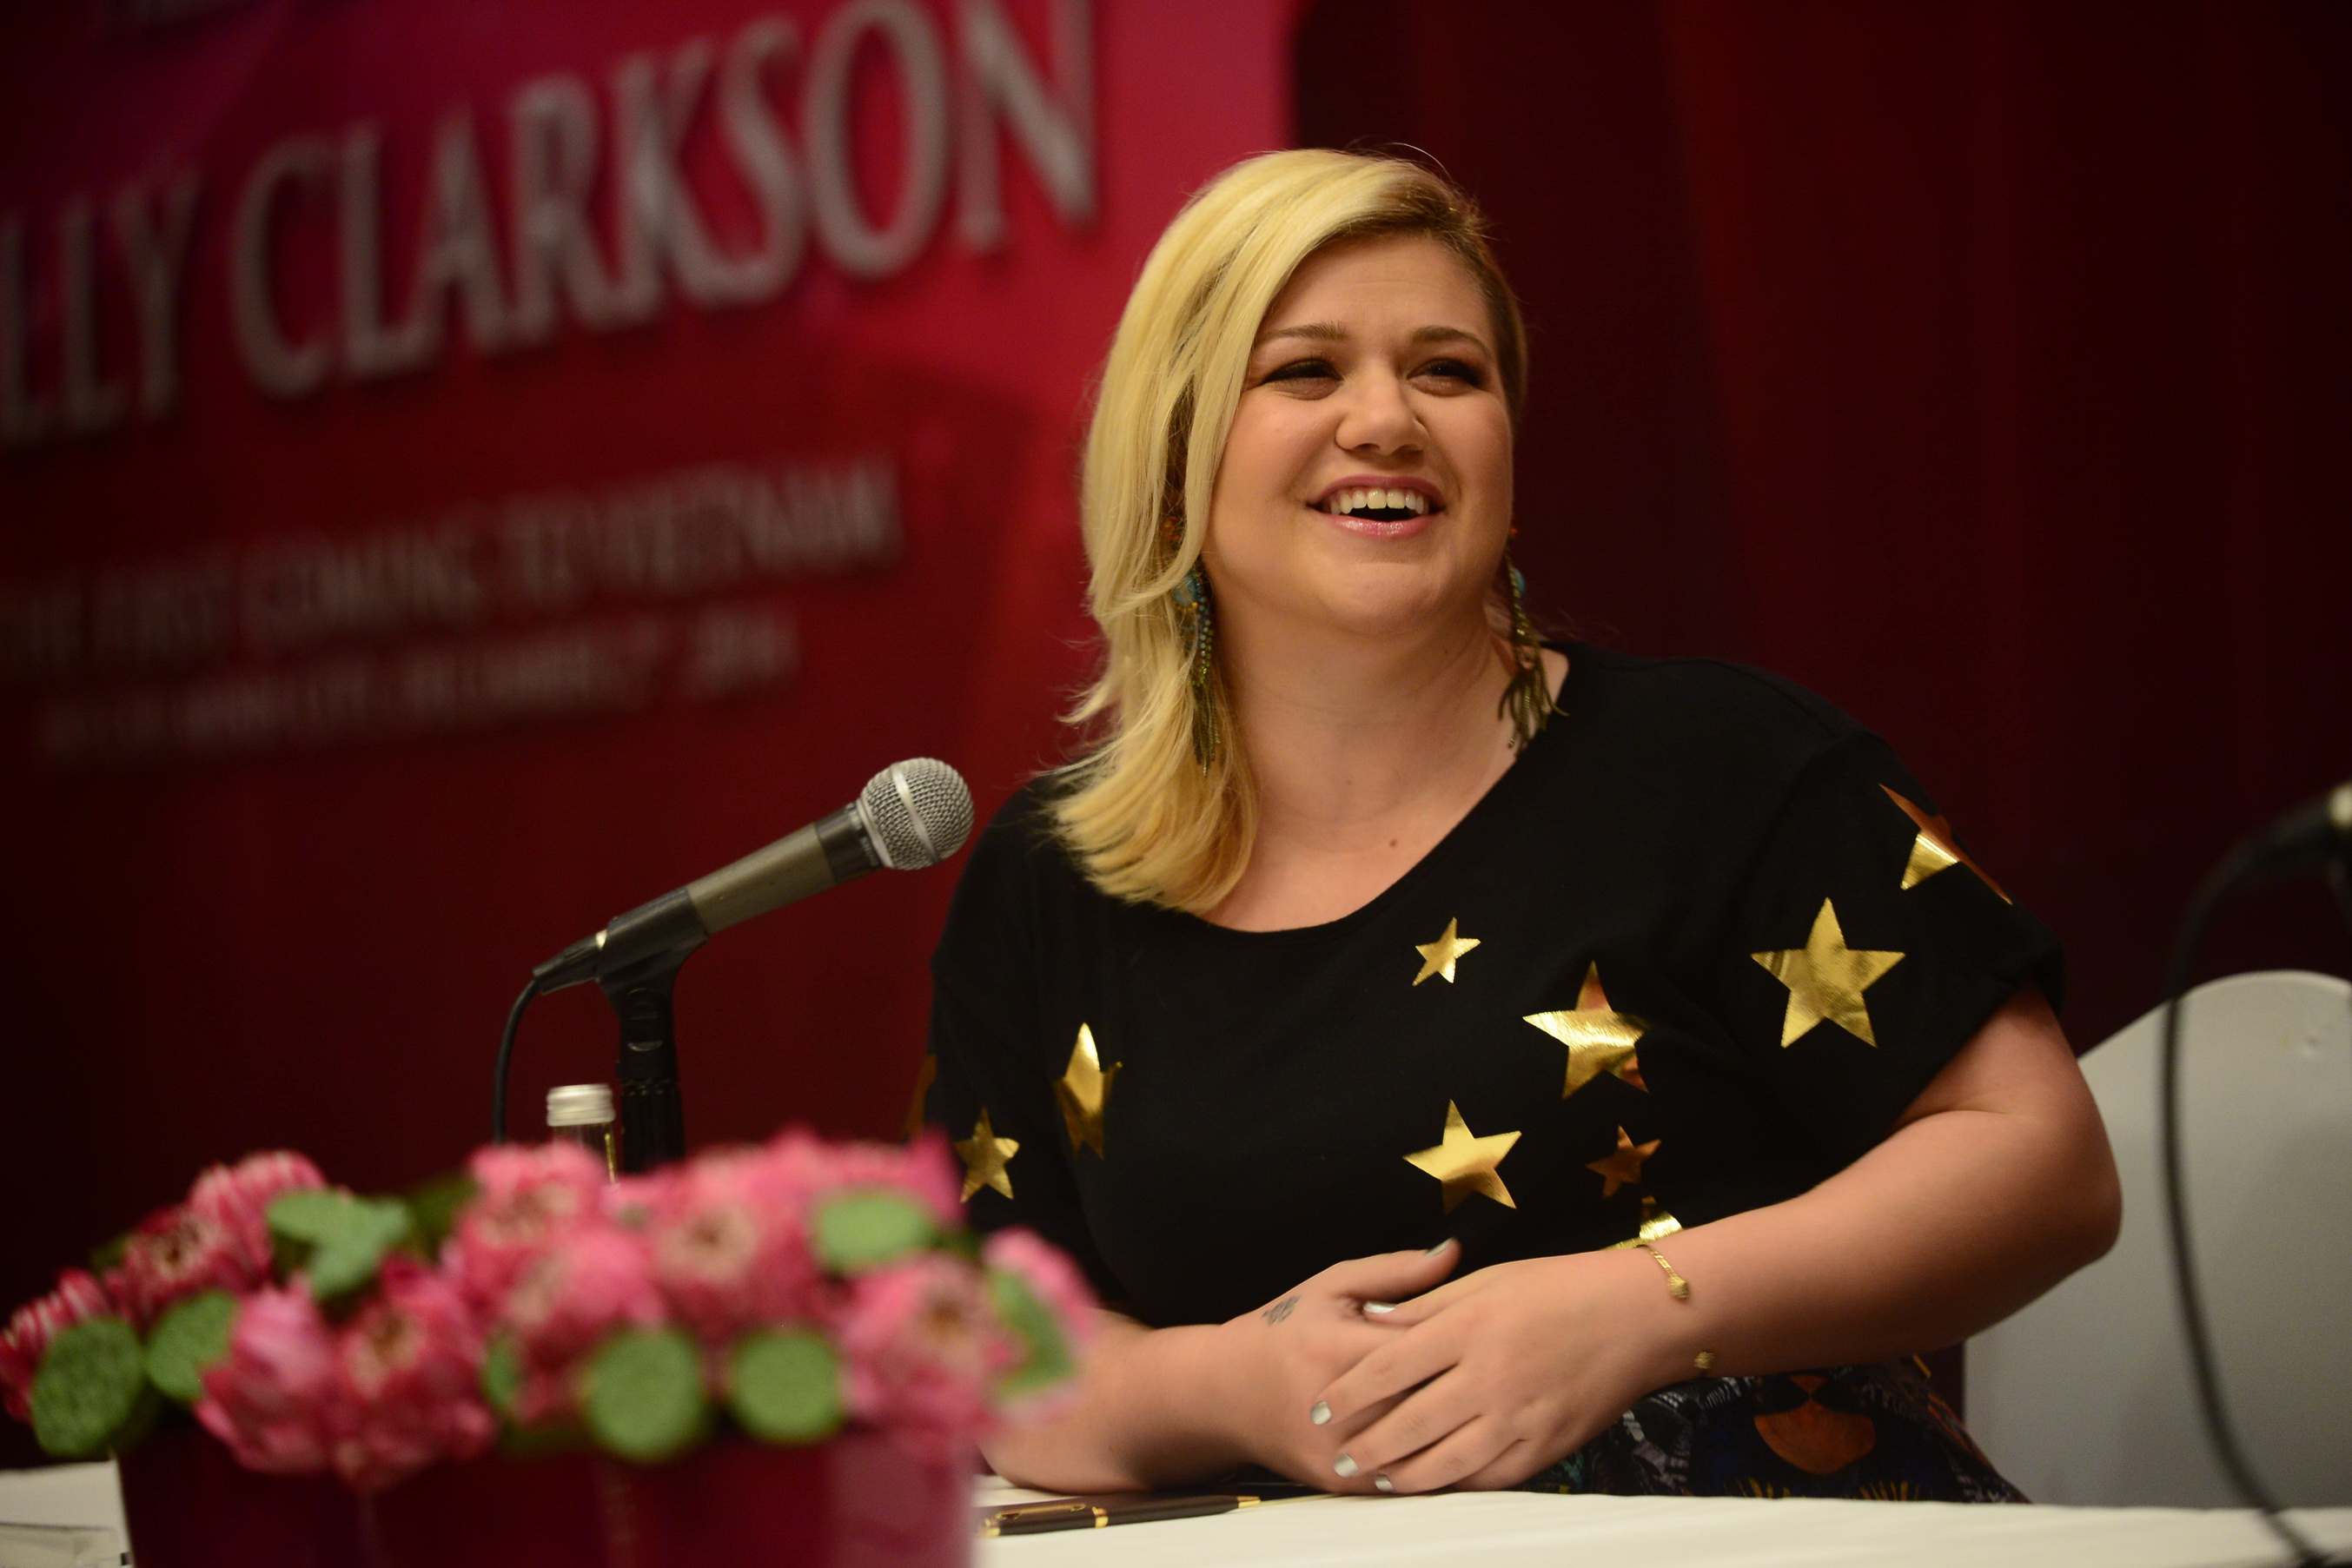 Kelly Clarkson says voice is her beauty ahead of Miss Vietnam performance